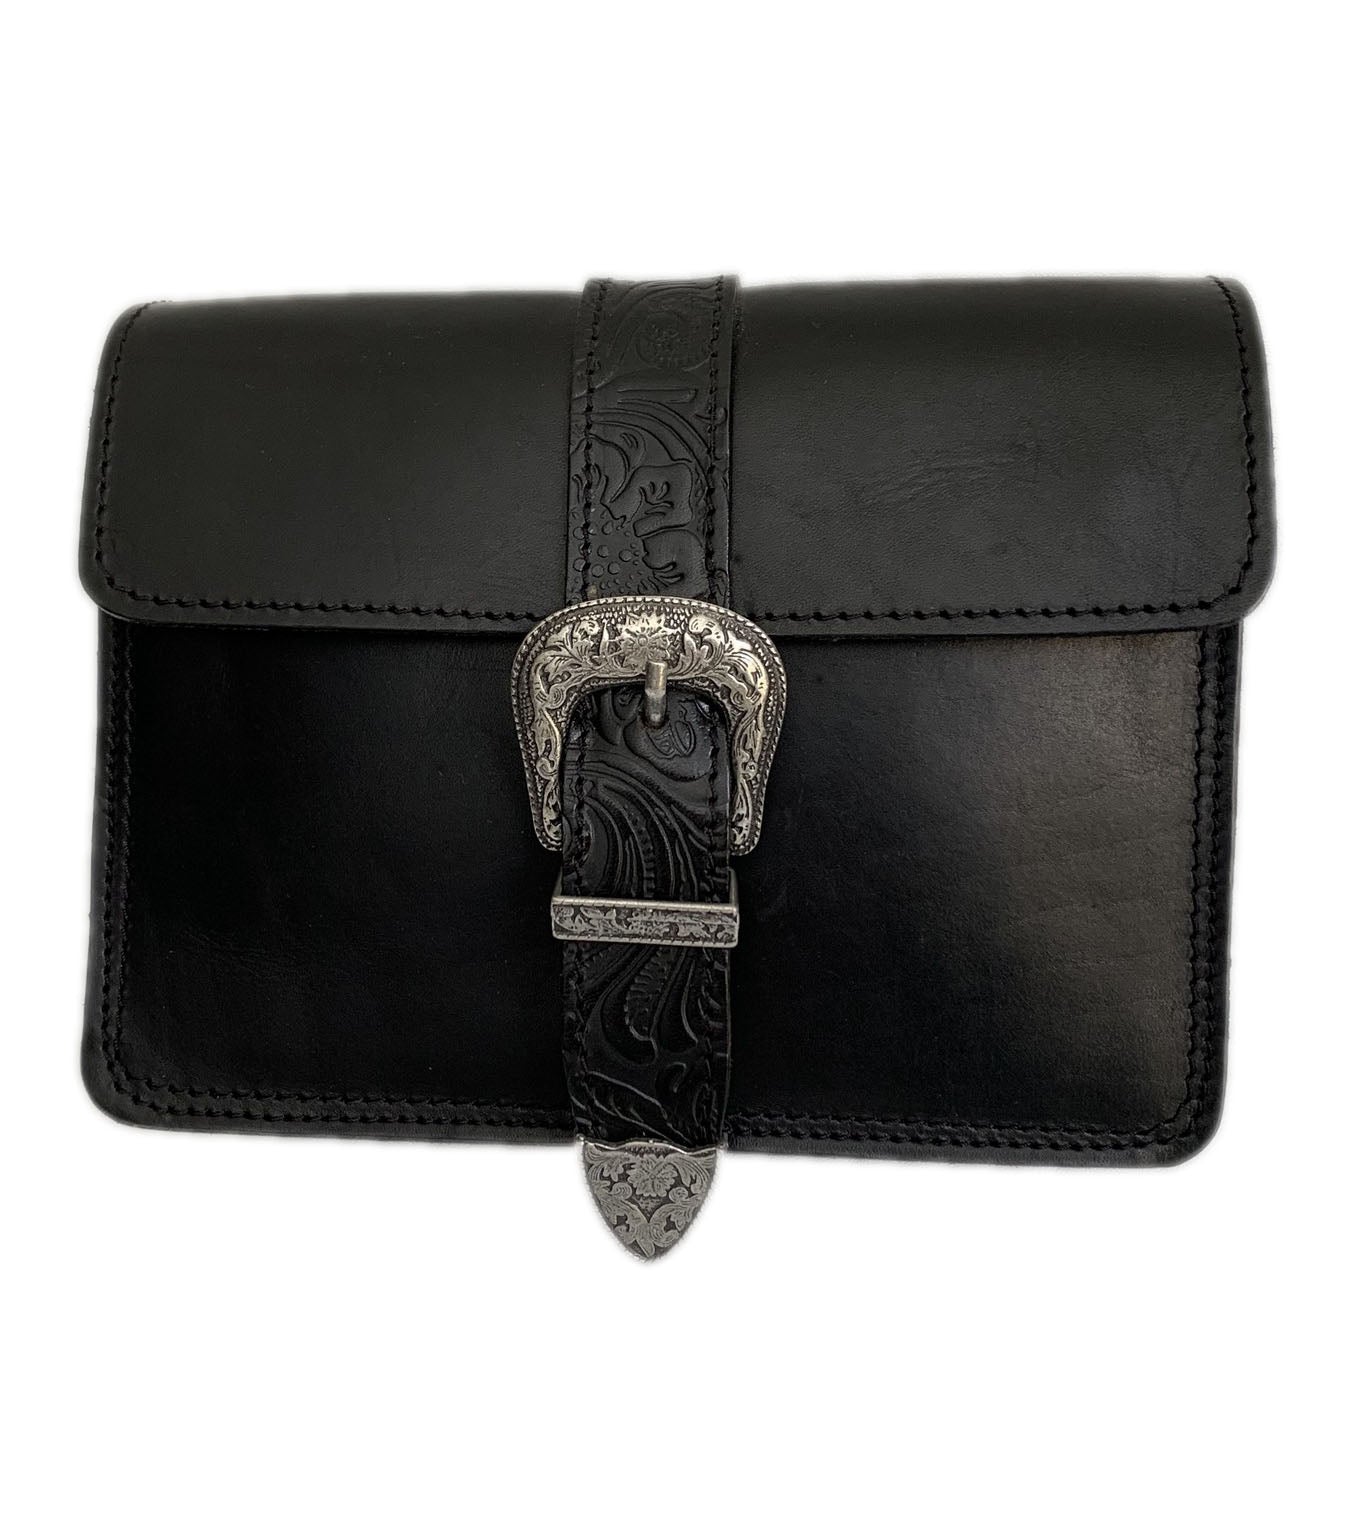 Kalypso" - small crossbody bag handcrafted from natural black leather with flower details WT/55F2FM2